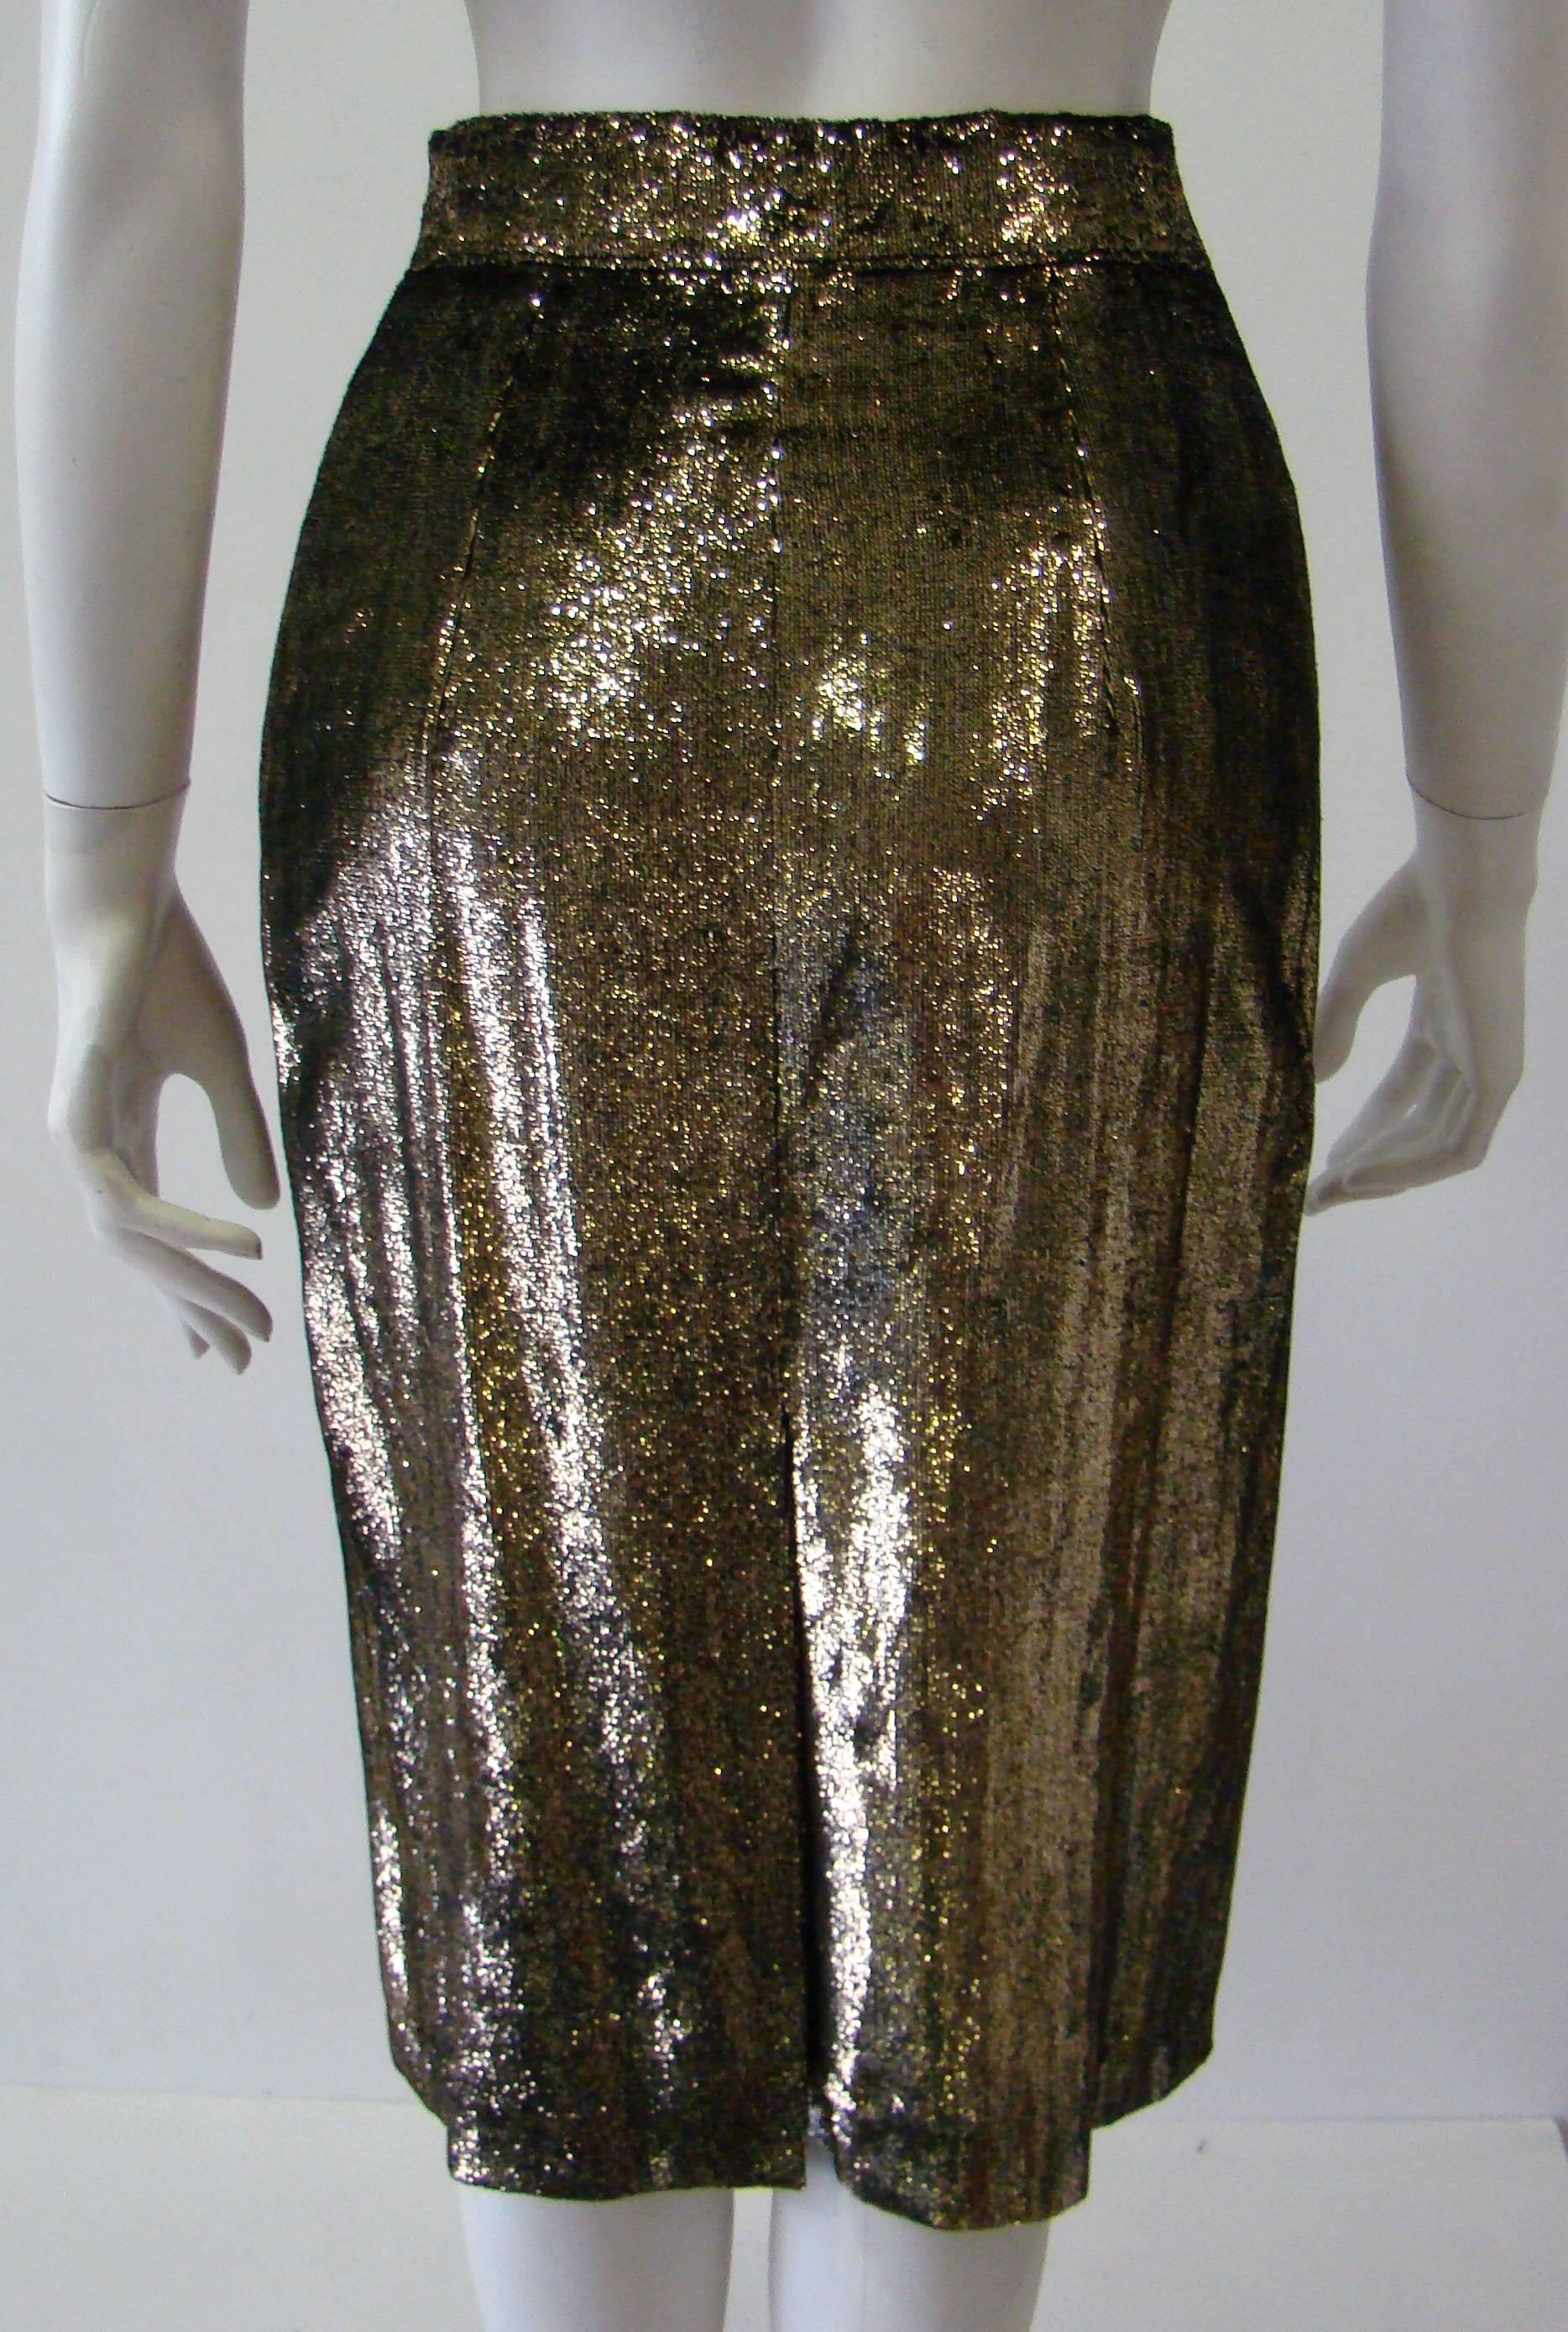 Women's Istante By Gianni Versace Gold Lame Skirt Fall 1986 For Sale